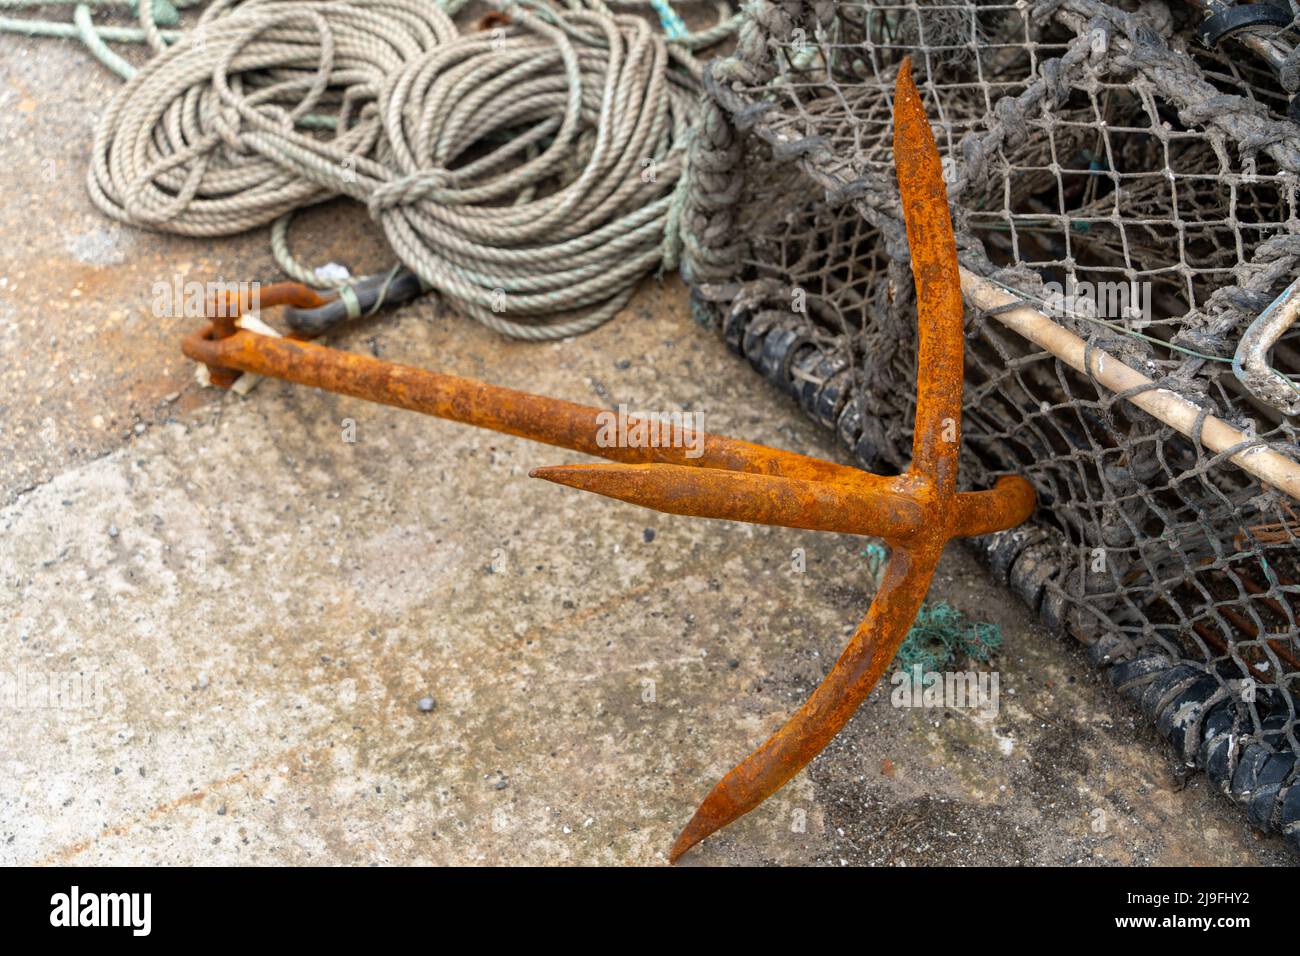 A rusty anchor next to a crab or lobster pot and a coil of rope, used in the fishing industry.  Concept of being anchored. Stock Photo